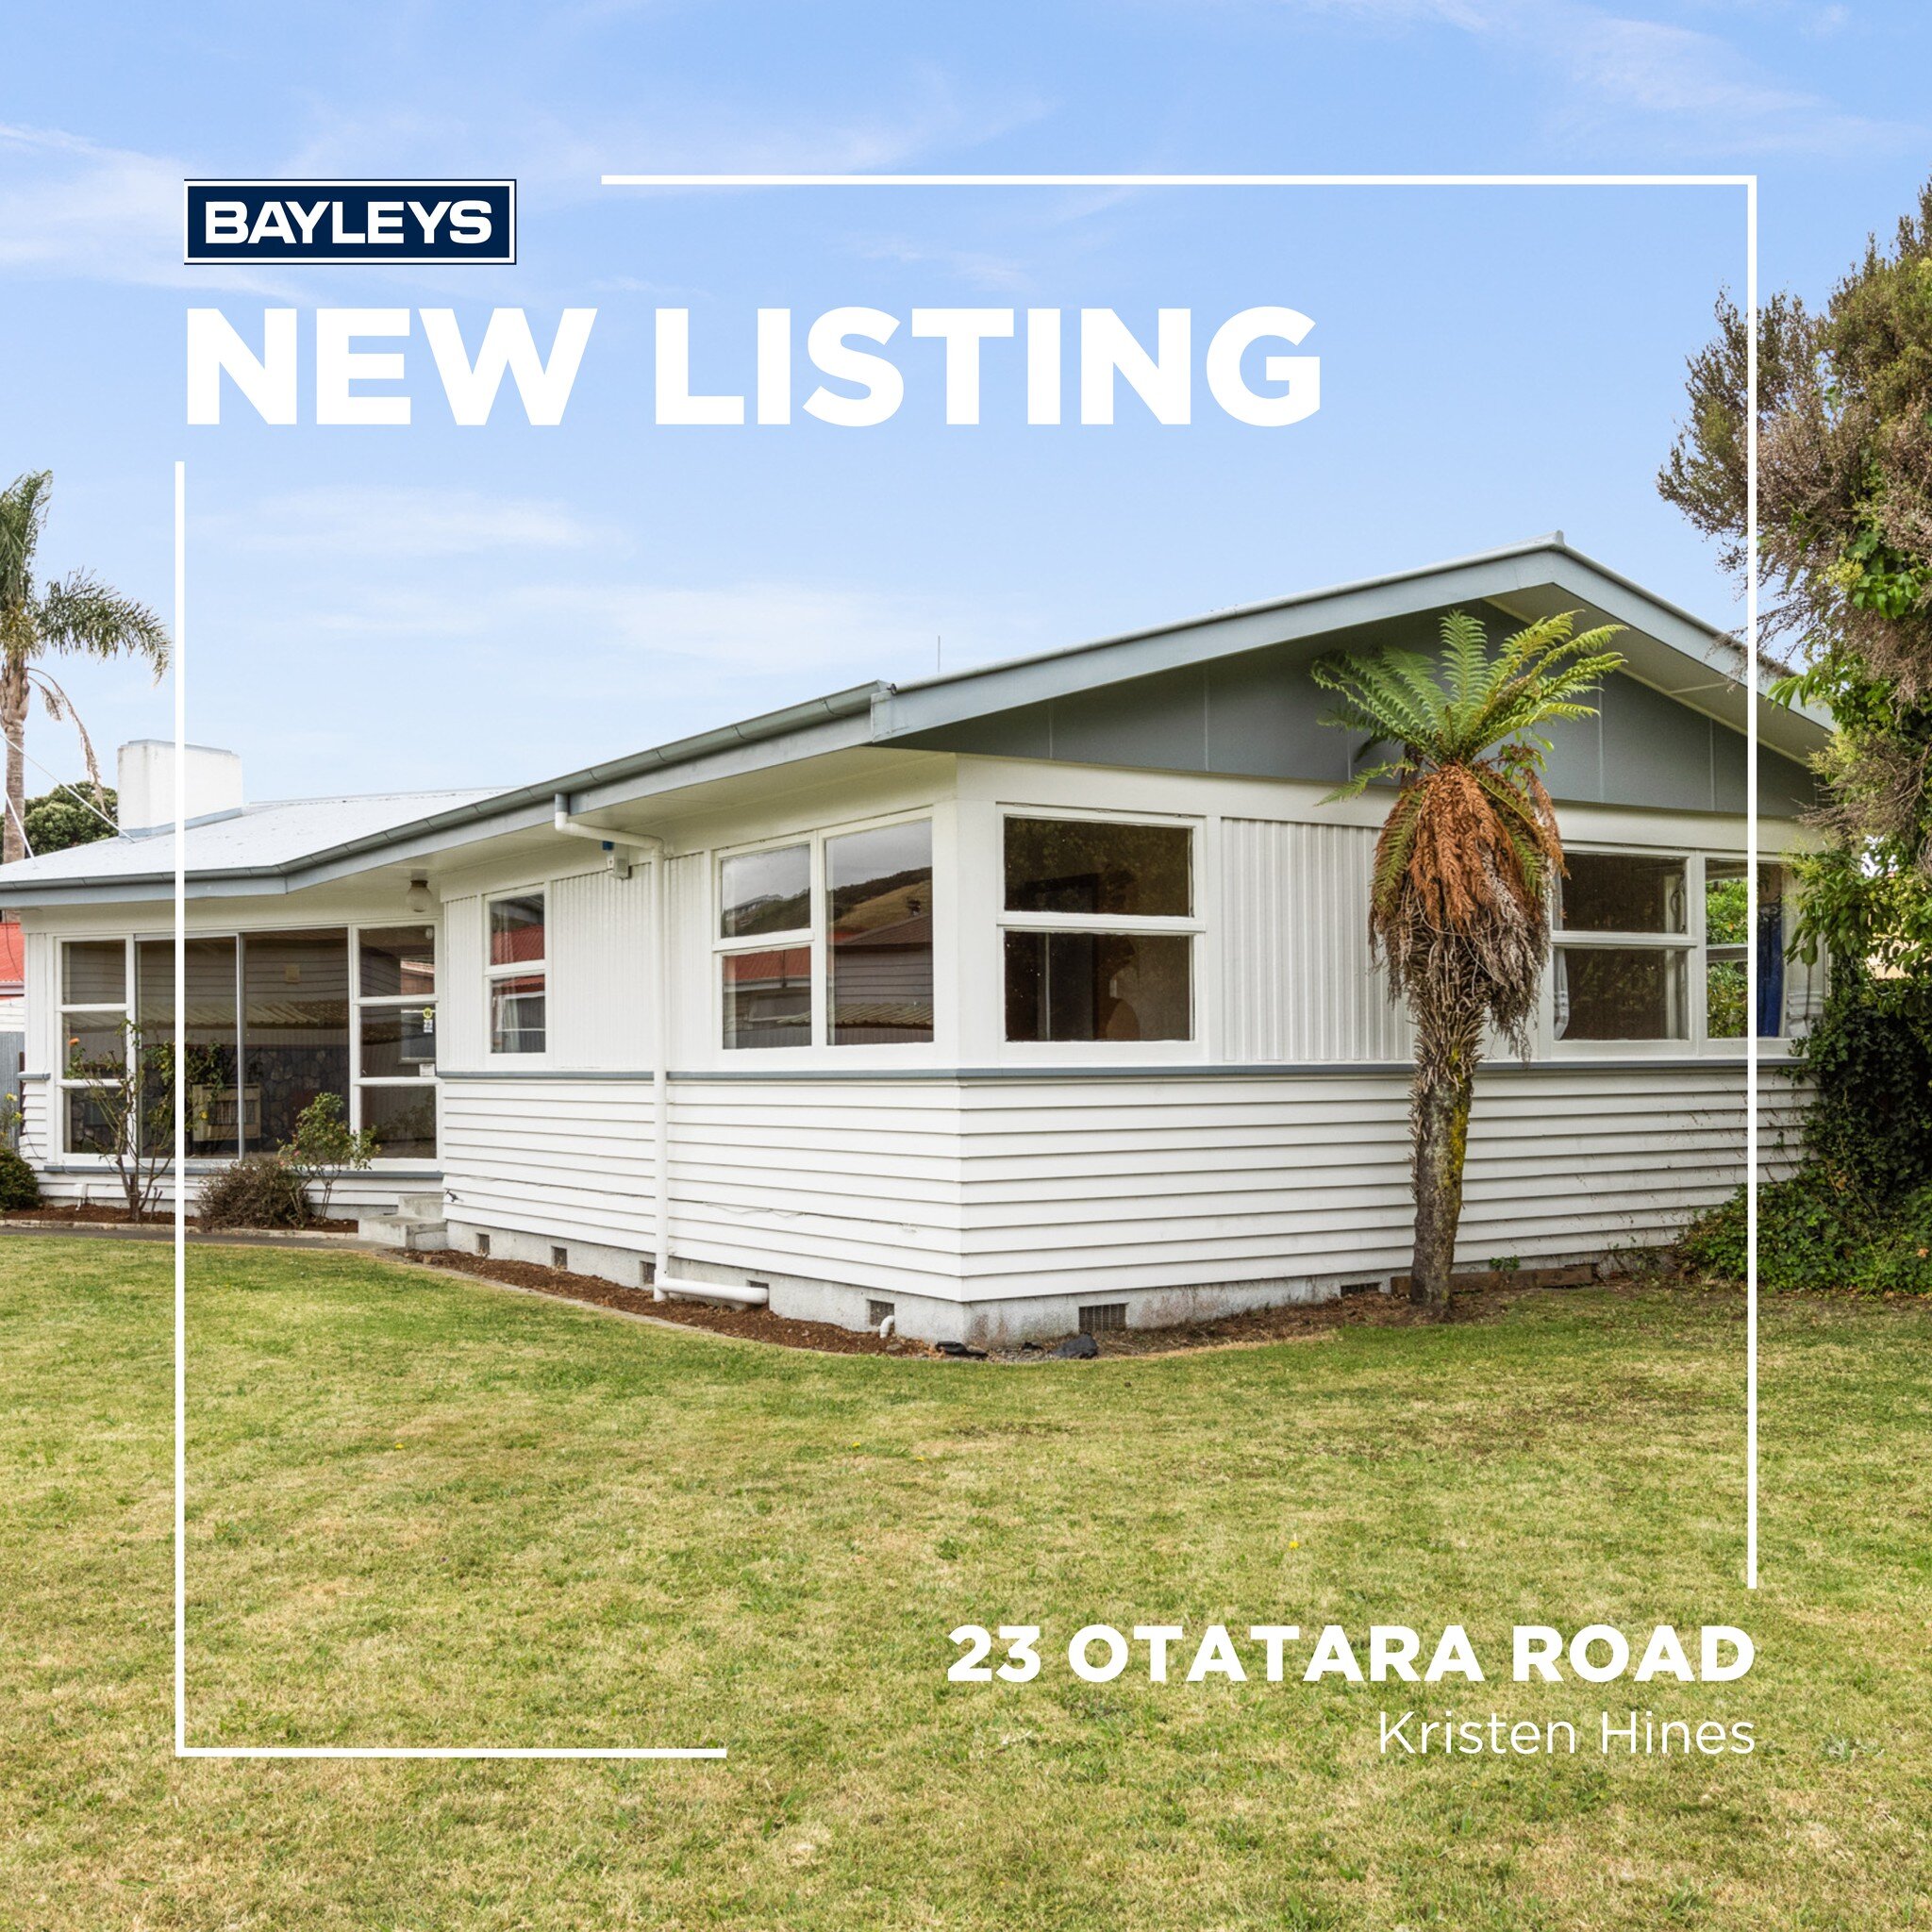 Calling first-home buyers, investors or developers | 23 Otatara Road, Taradale🏡

Boasting a generous 764sqm of prime real estate, this property offers the potential for redevelopment. Savvy purchasers will recognise the untapped potential here, offe